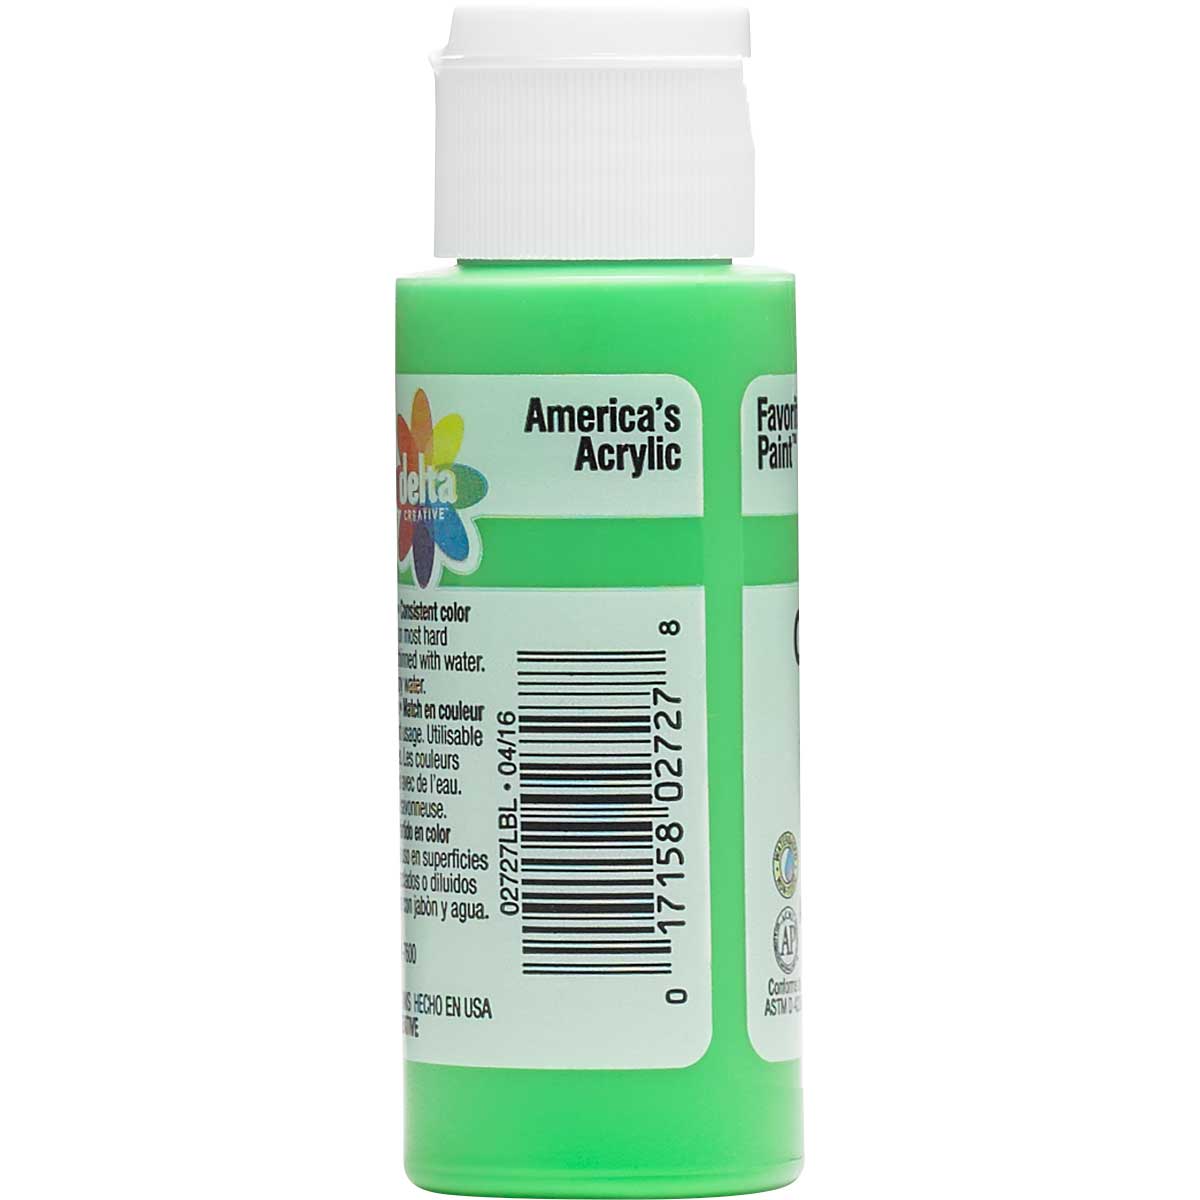 Delta Ceramcoat Acrylic Paint - Electric Lime, 2 oz. - 02727